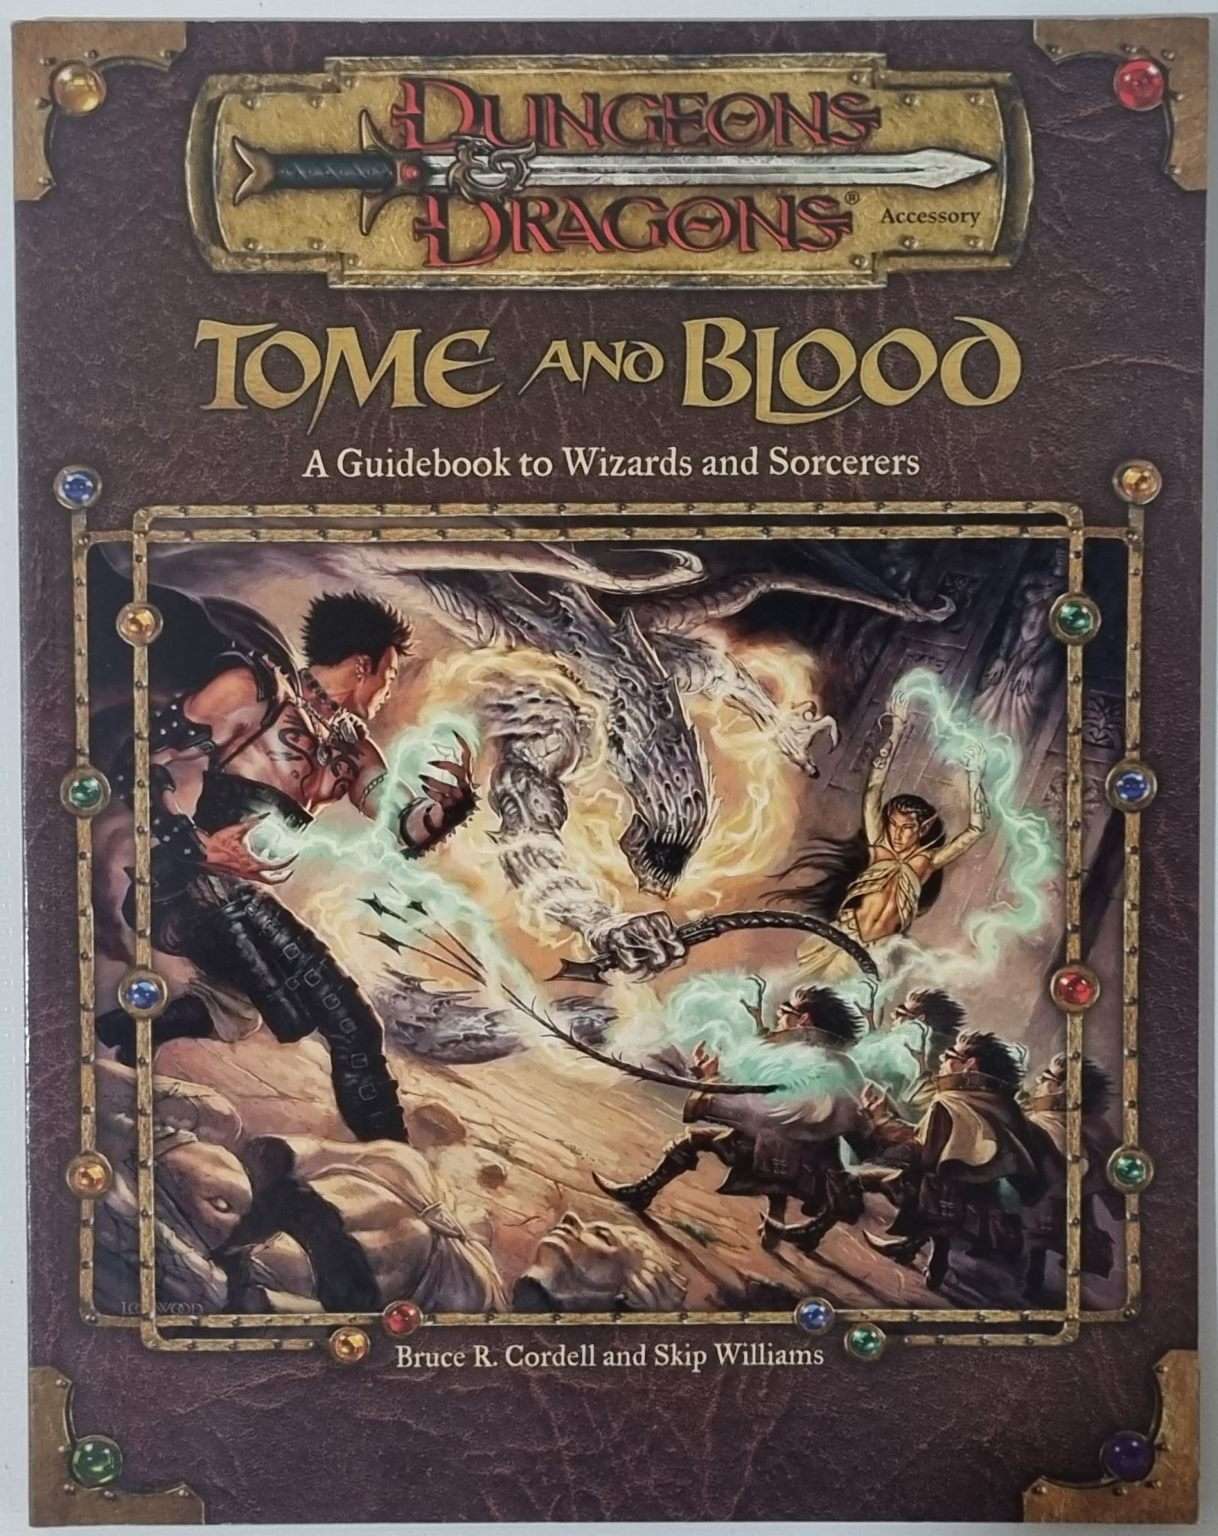 D&D - Tome and Blood - Guidebook to Wizards and Sorcerers (3.0 e)